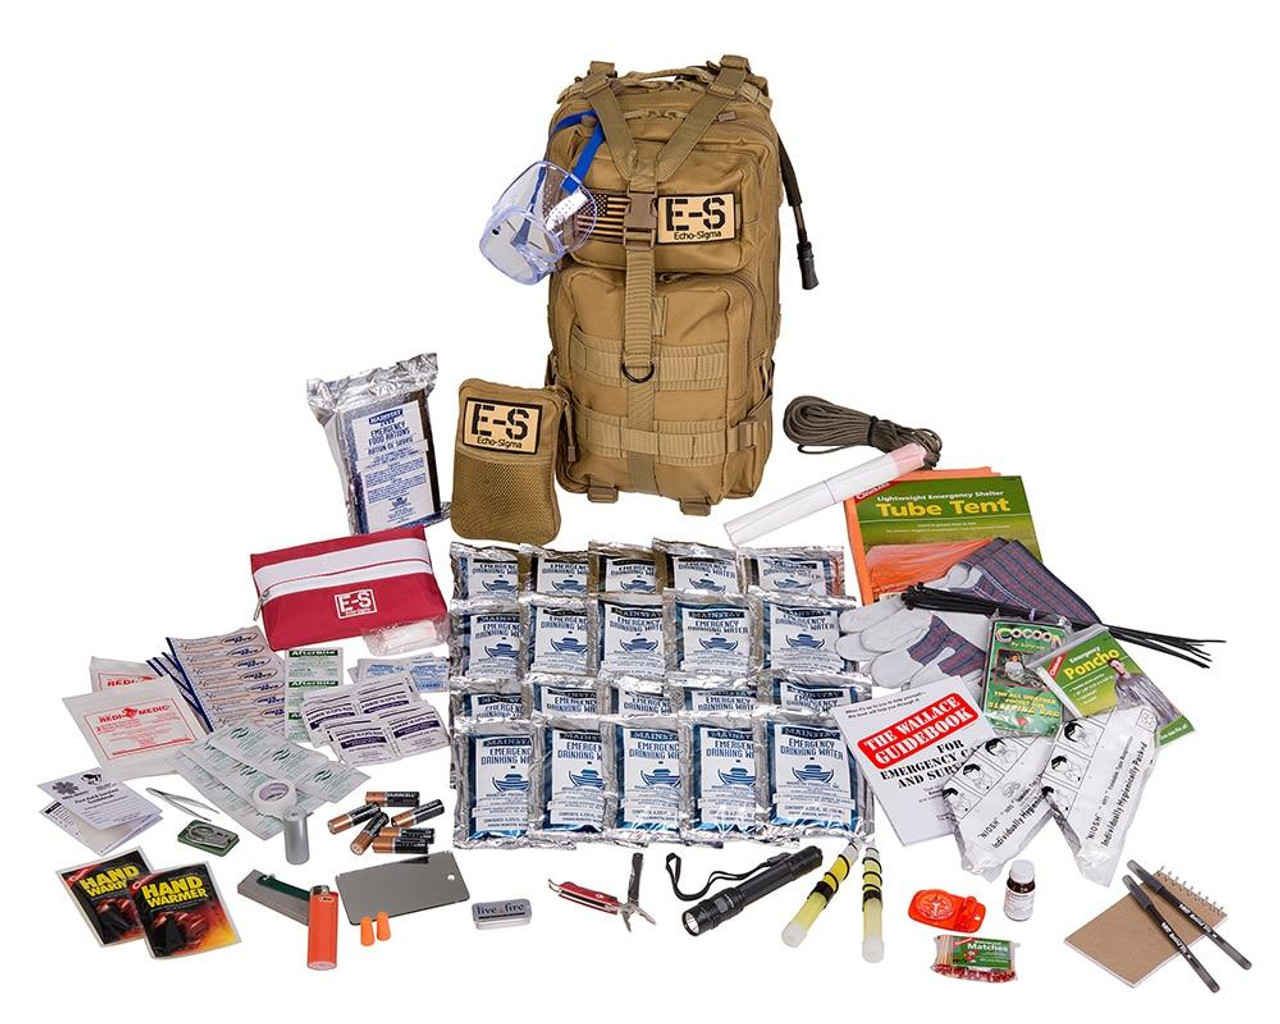 21 Get Home Bag Essentials to Pack Today - TACTICAL